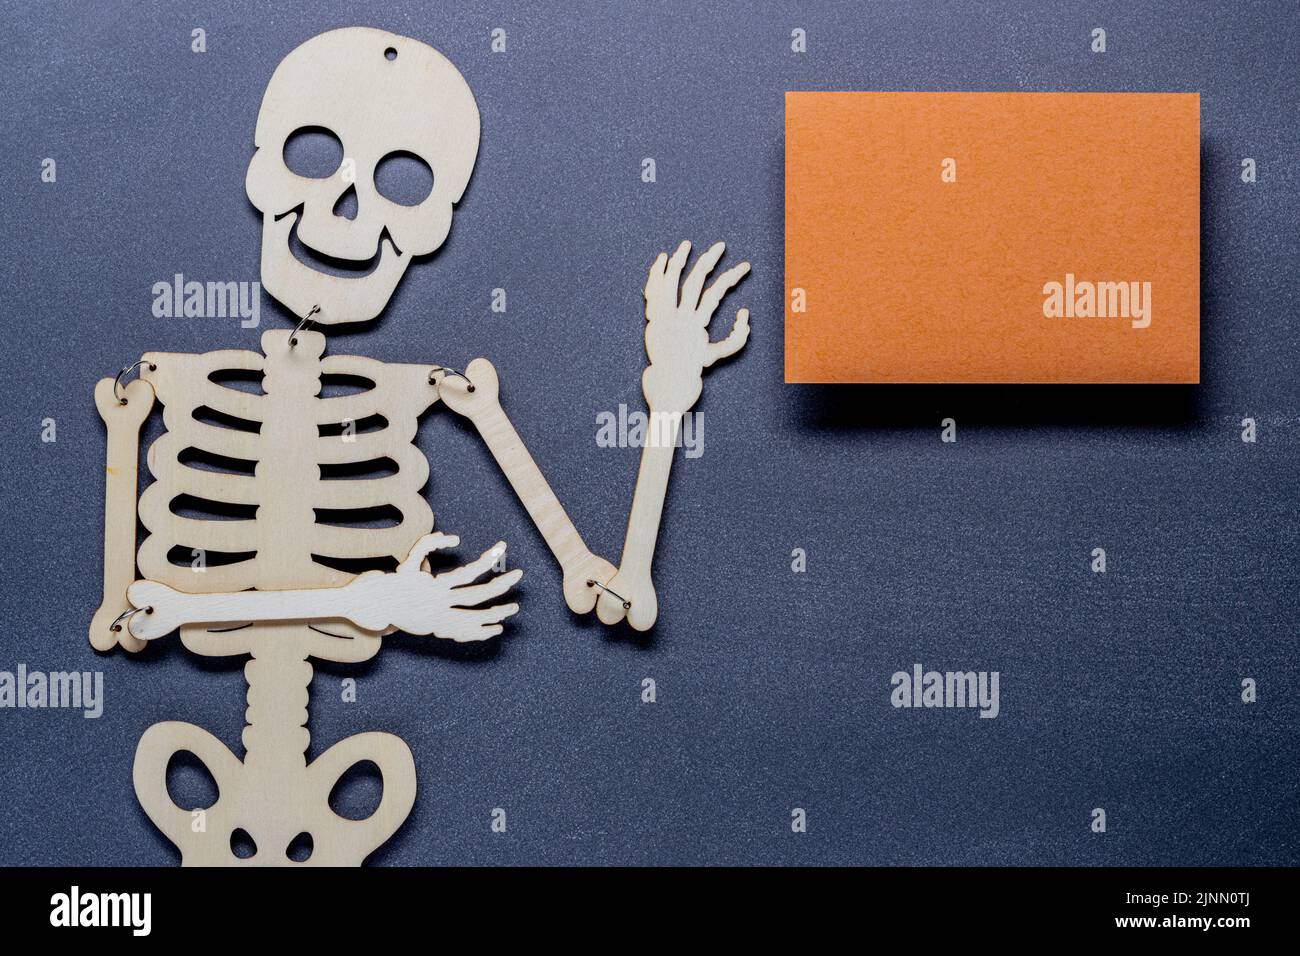 fall or autumn composition of skeleton against a slate blackboard background with an orange paper blank. Flat lay, top view with copy space Stock Photo